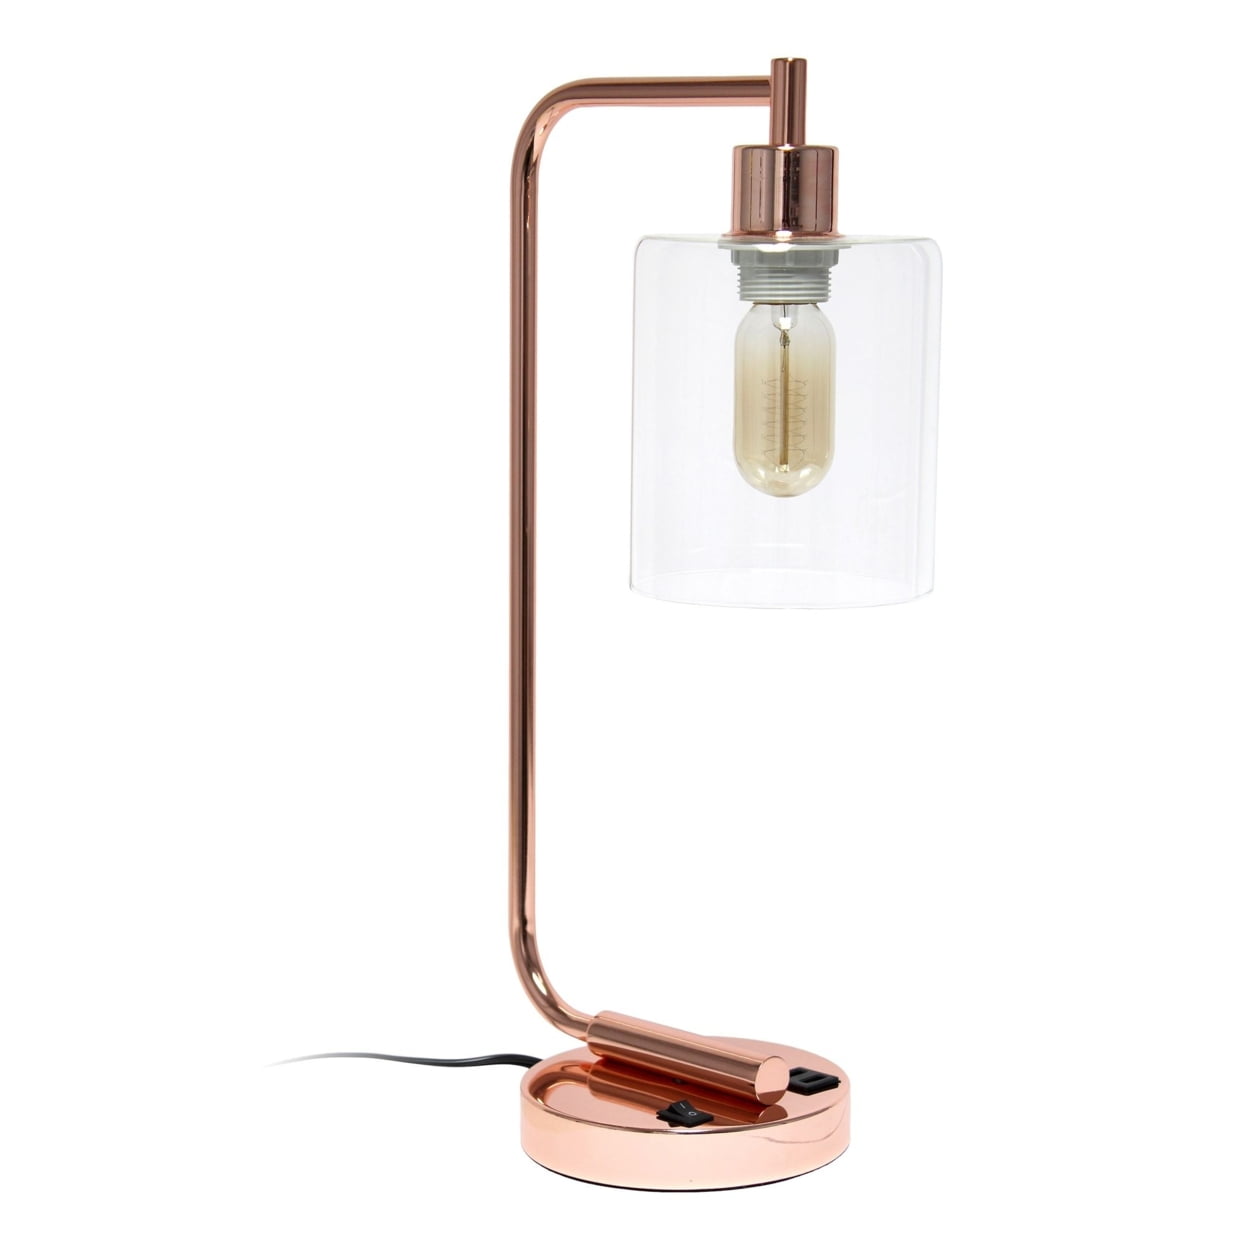 Lalia Home Modern Iron Desk Lamp with USB Port and Glass Shade, Rose Gold